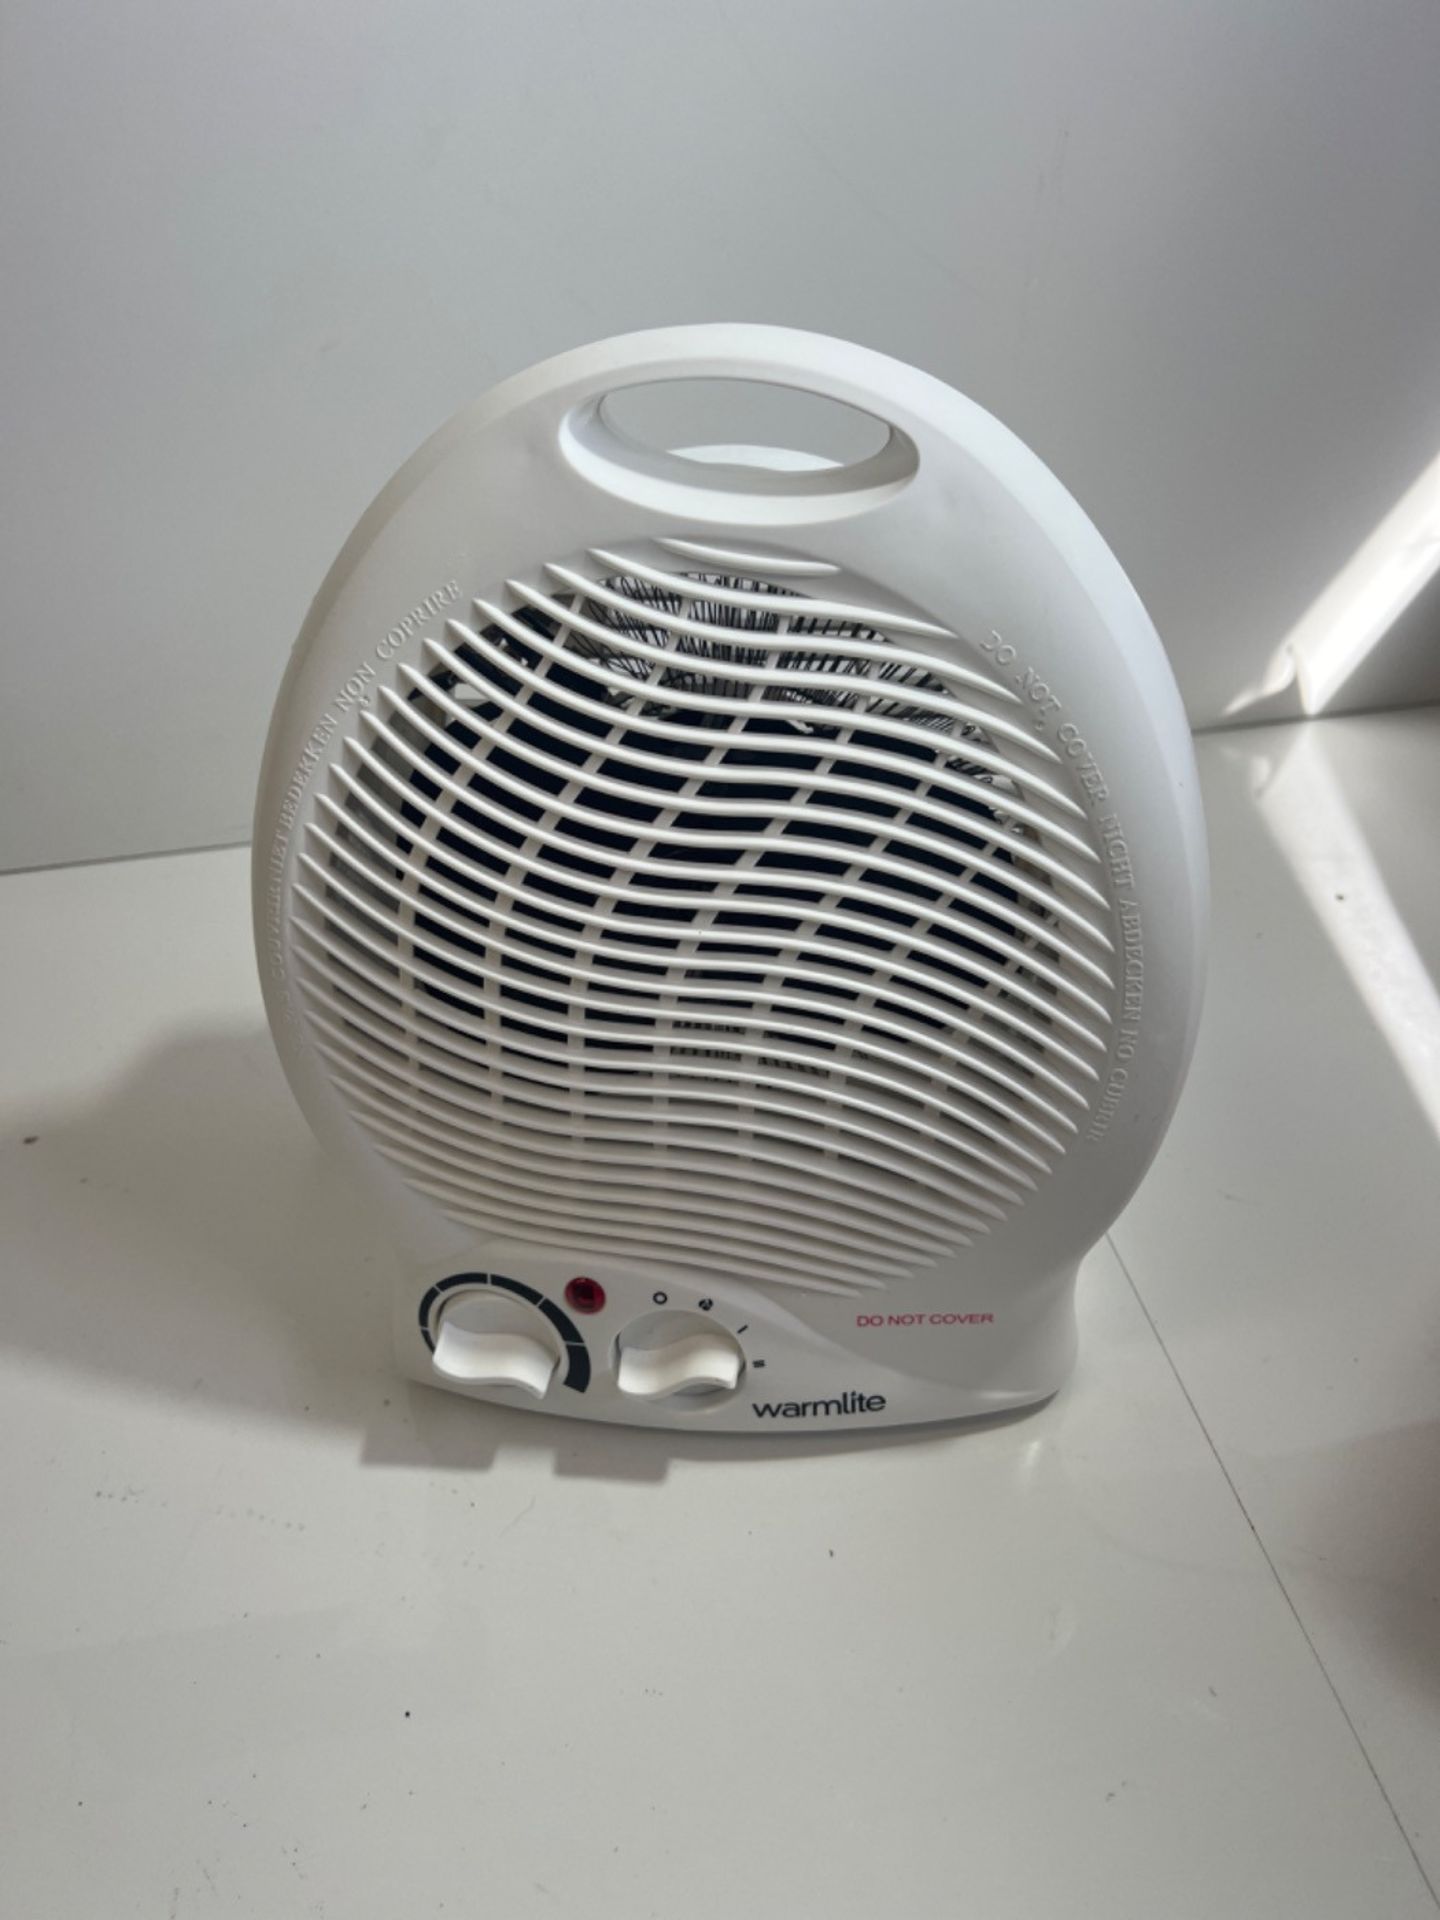 Warmlite WL44002 Thermo Fan Heater with 2 Heat Settings and Overheat Protection, 2000W, White - Image 2 of 3